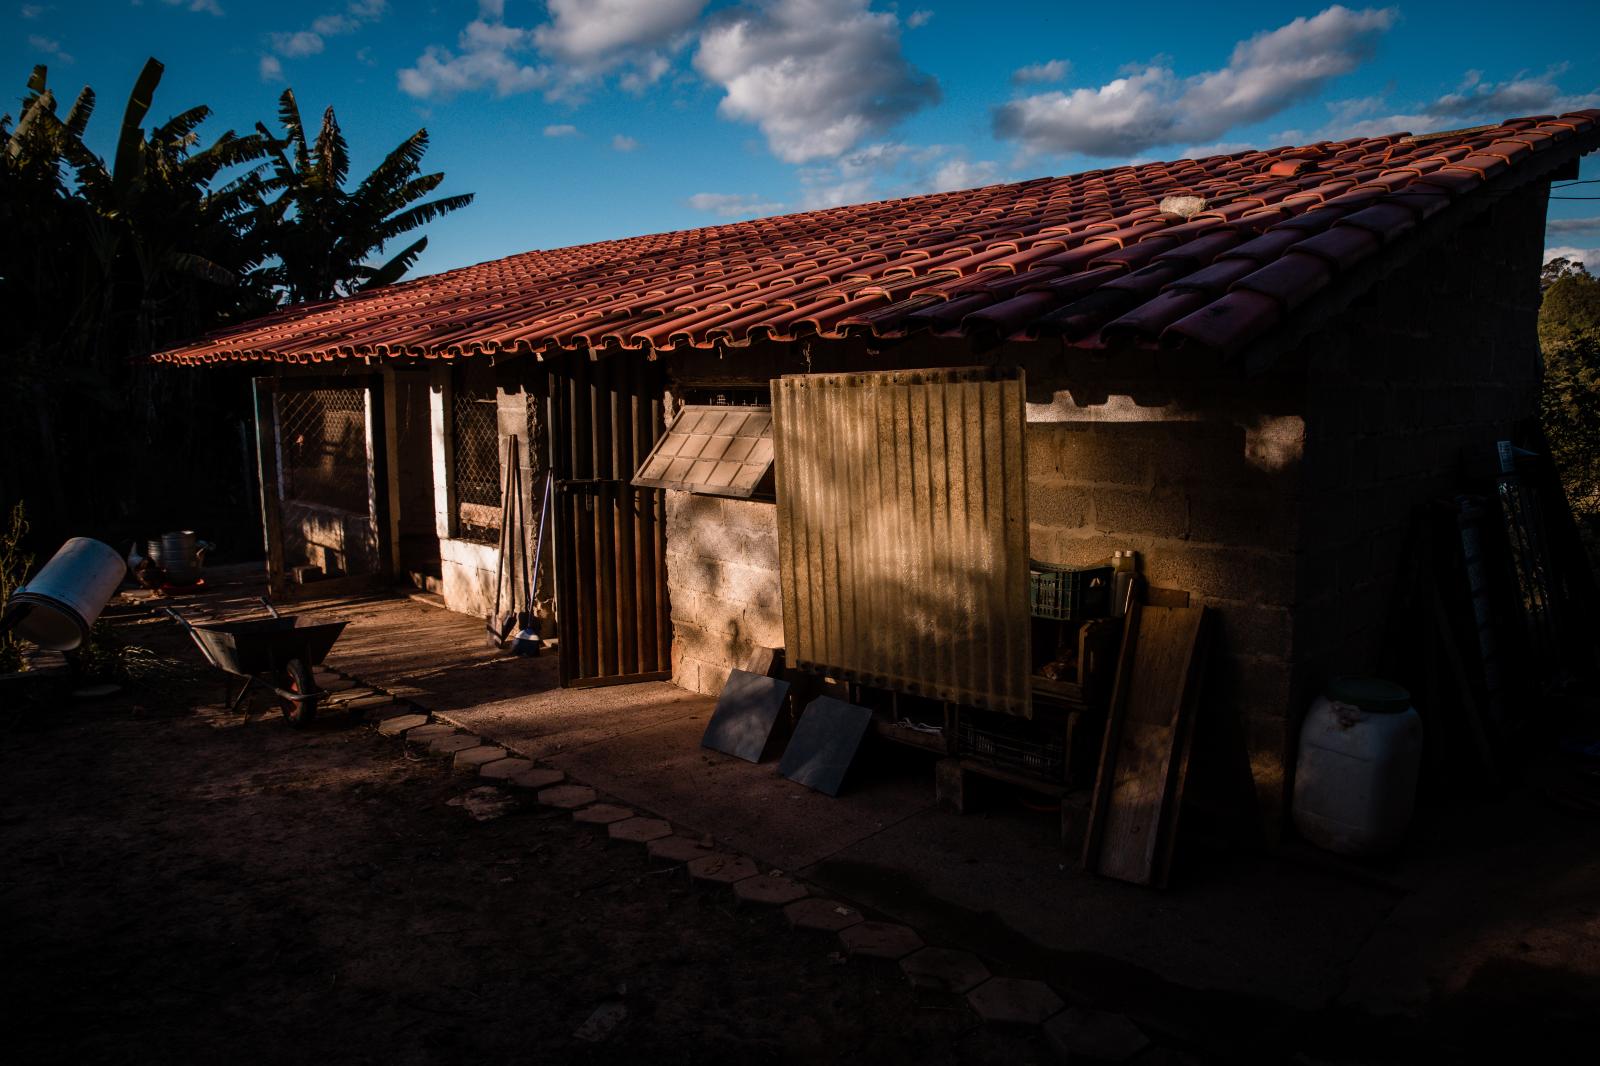 Life of a chicken farm during the Covid-19 pandemic in Brazil